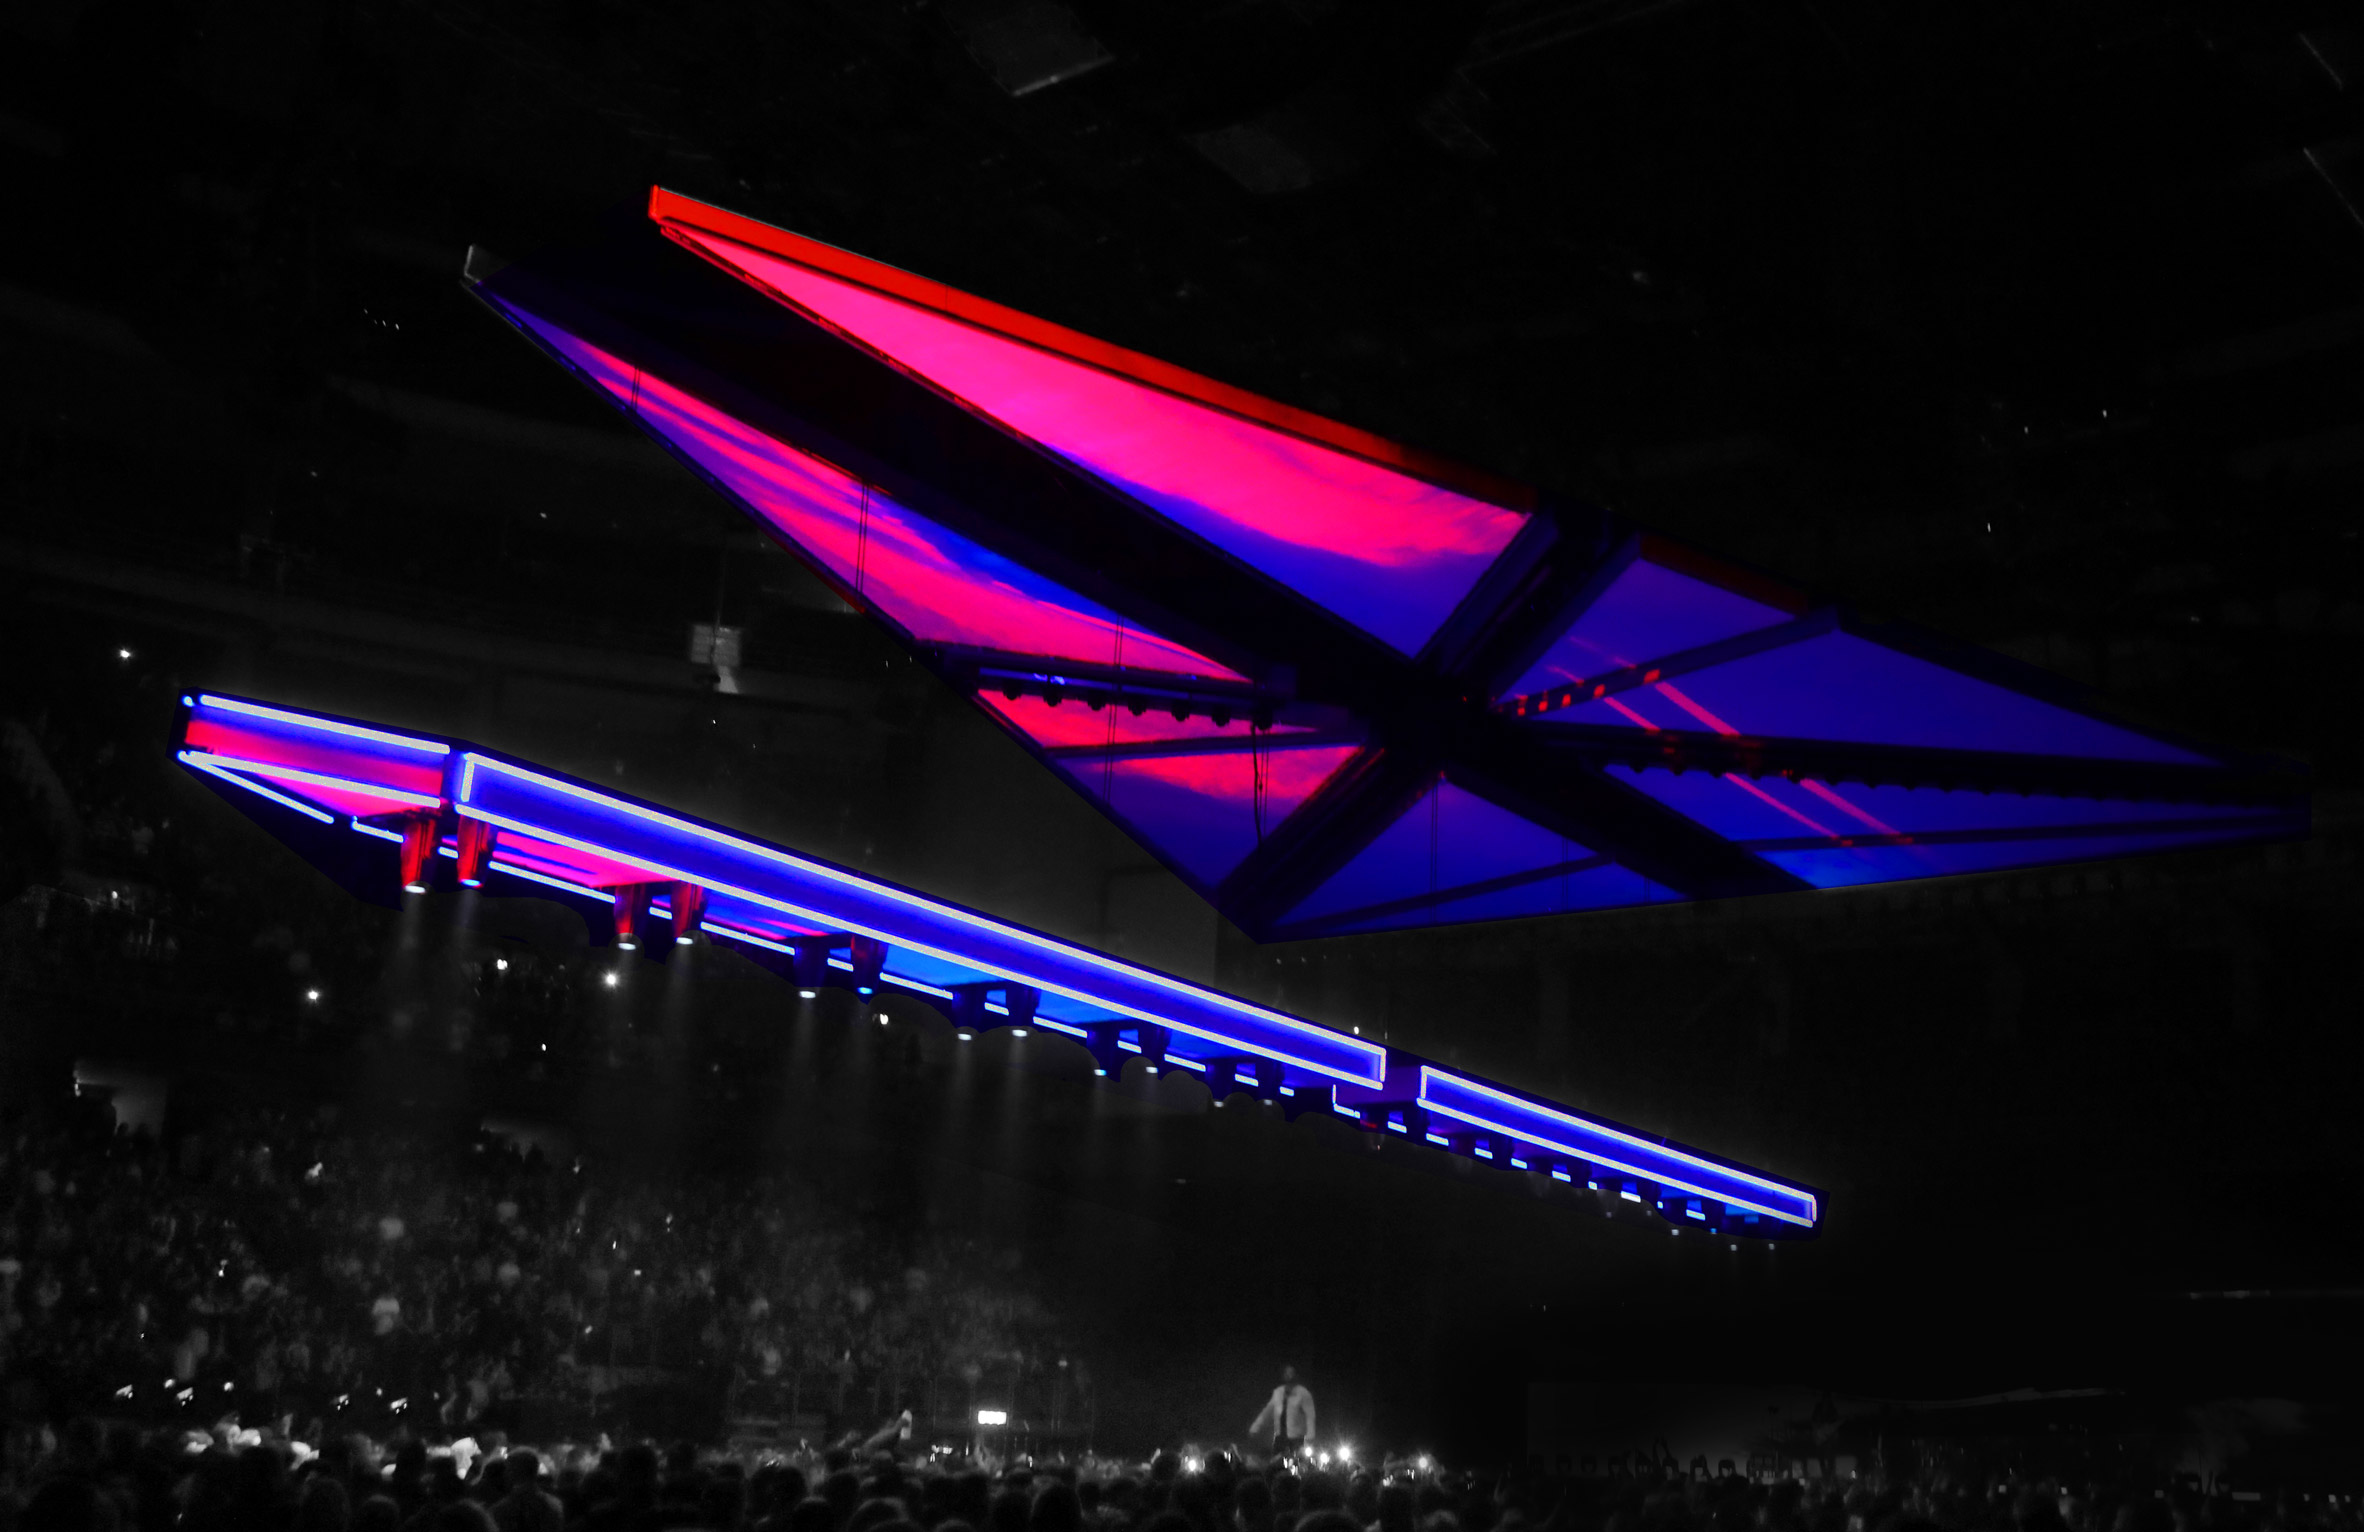 Es Devlin's folding star destroyer looms over The Weeknd's world tour